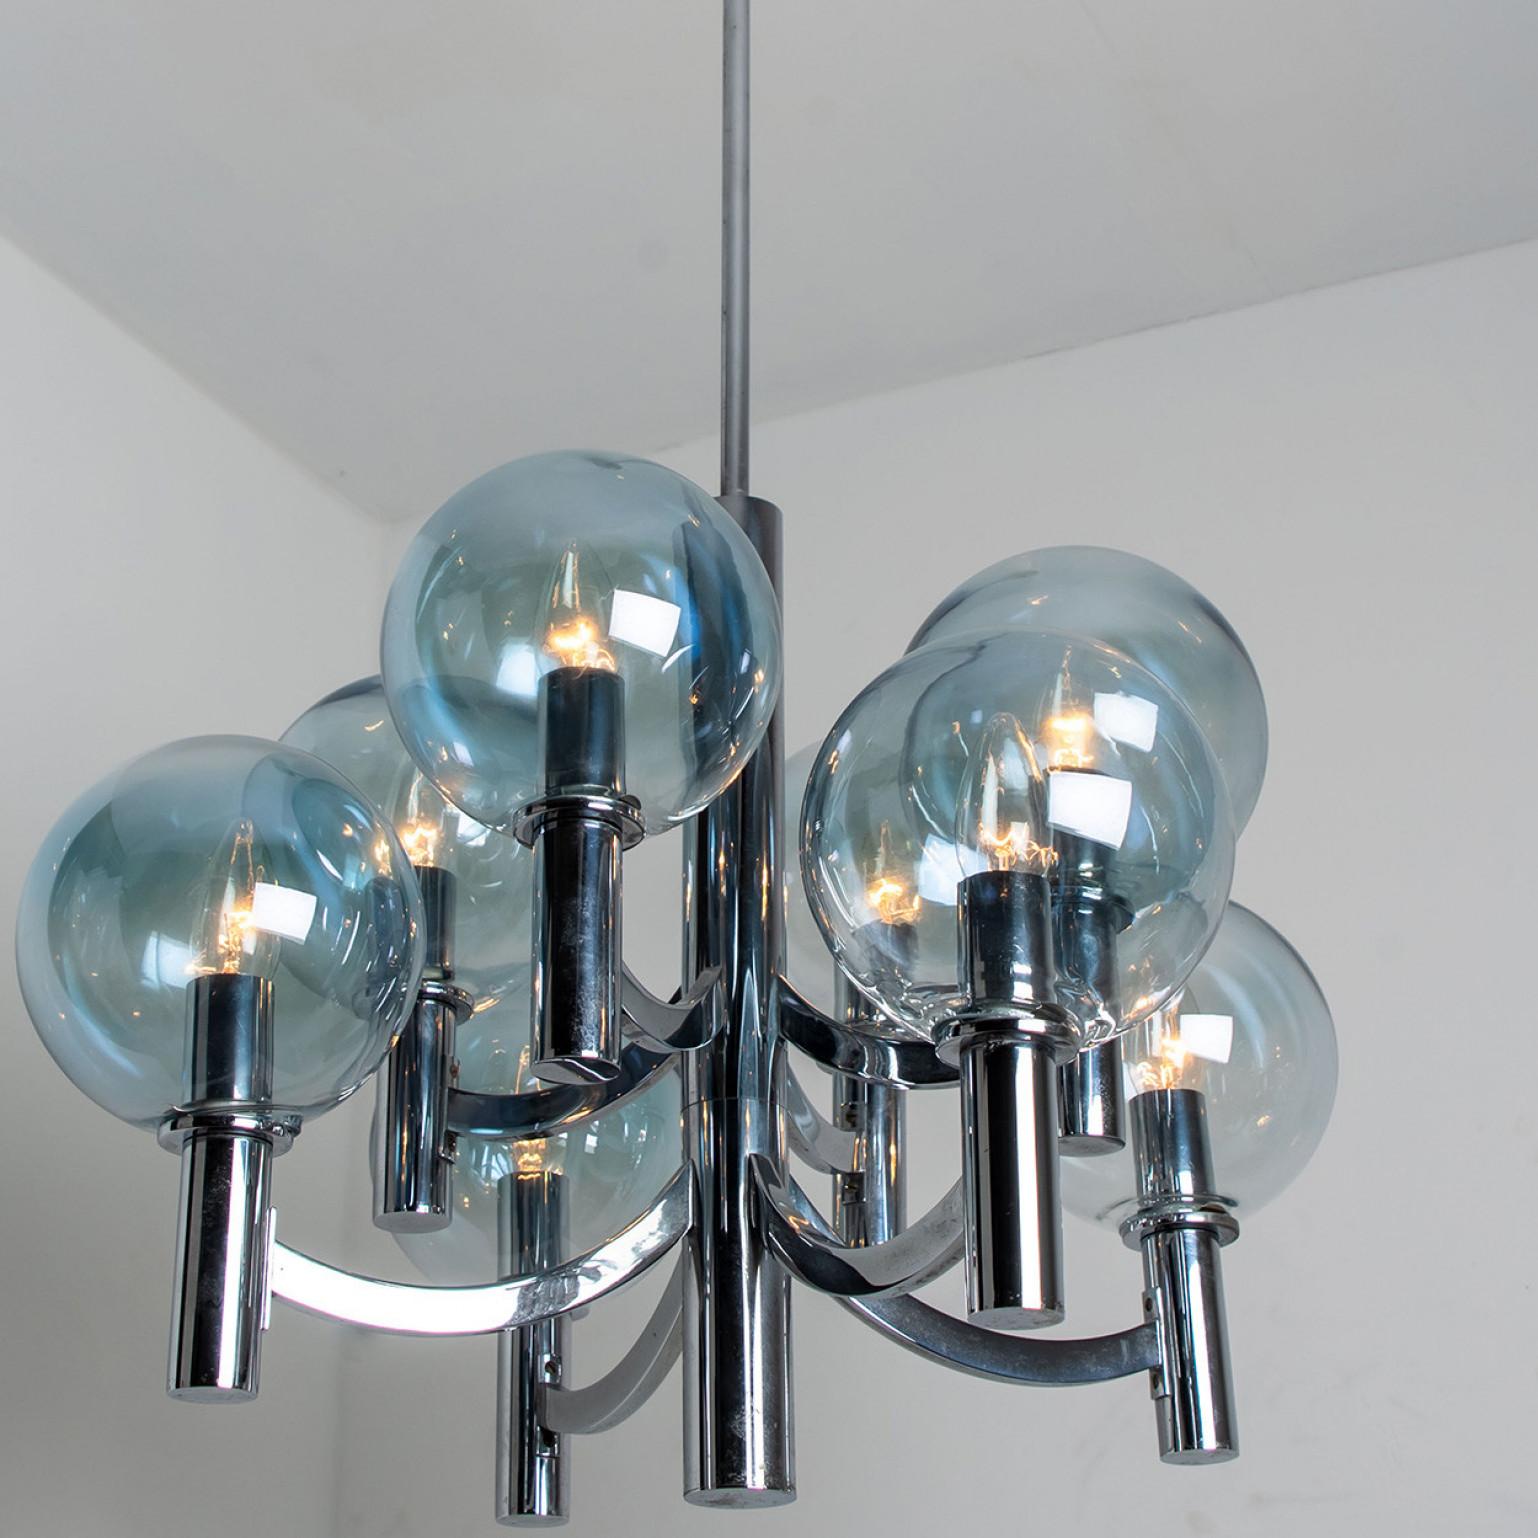 Late 20th Century Chrome and Light Blue Glass Chandelier in the style of Arne Jakobsson, 1970s For Sale